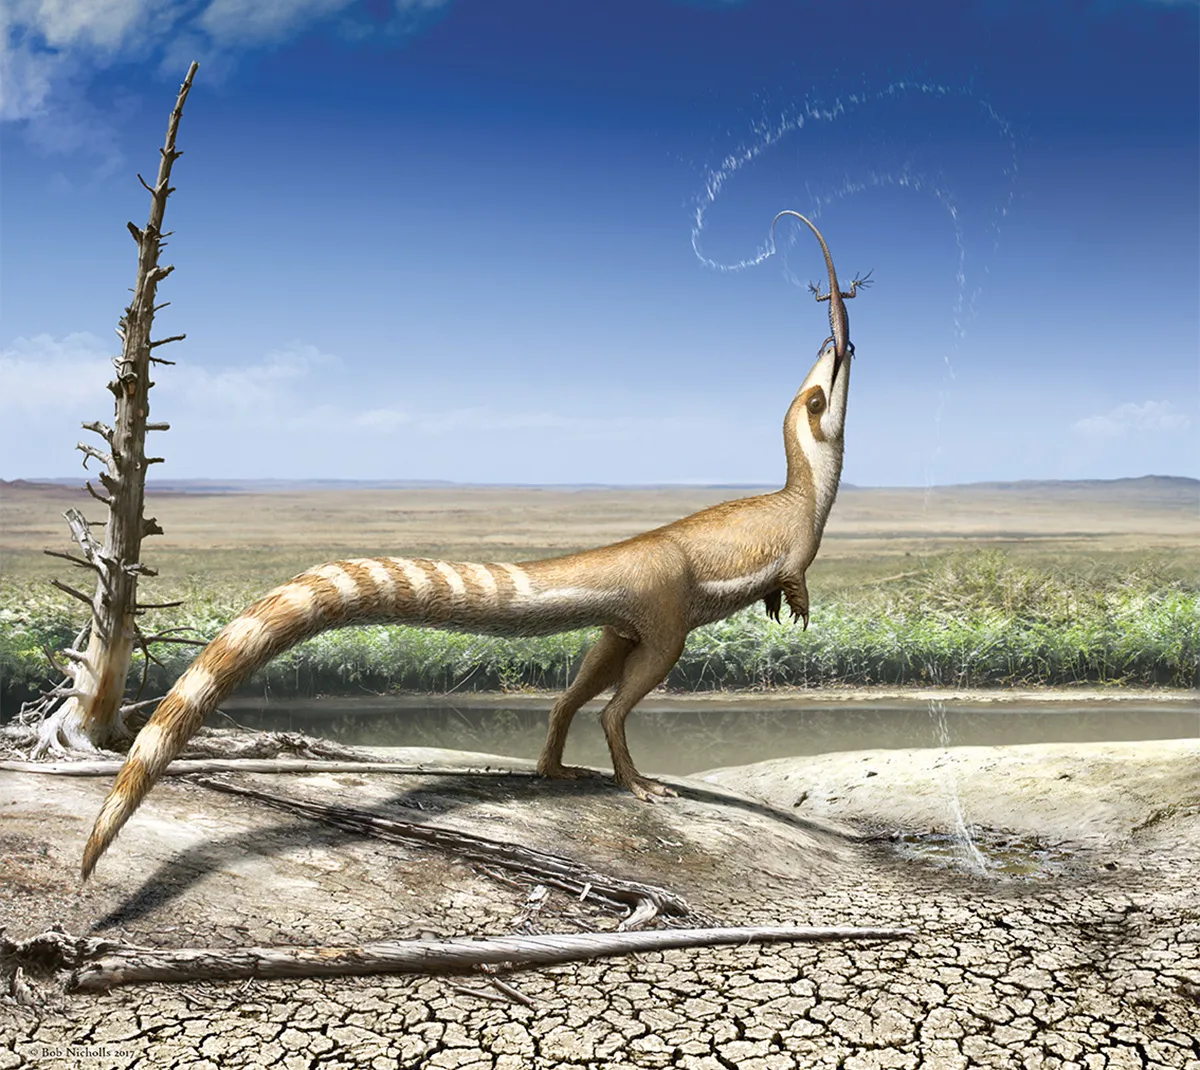 Sinosauropteryx snatches lizard Dalinghosaurus from a small pool and shakes it. Dinosaurs did not chew their food, so he grabs the prey animal, twists it round so it faces head-first and gulps it down. This is why there is a whole lizard skeleton inside the guts of one of the museum specimens of Sinosauropteryx (see page 33). This image shows the ginger-and-white striped tail, the countershading along the side, and the bandit mask. Painting by Bob Nicholls.